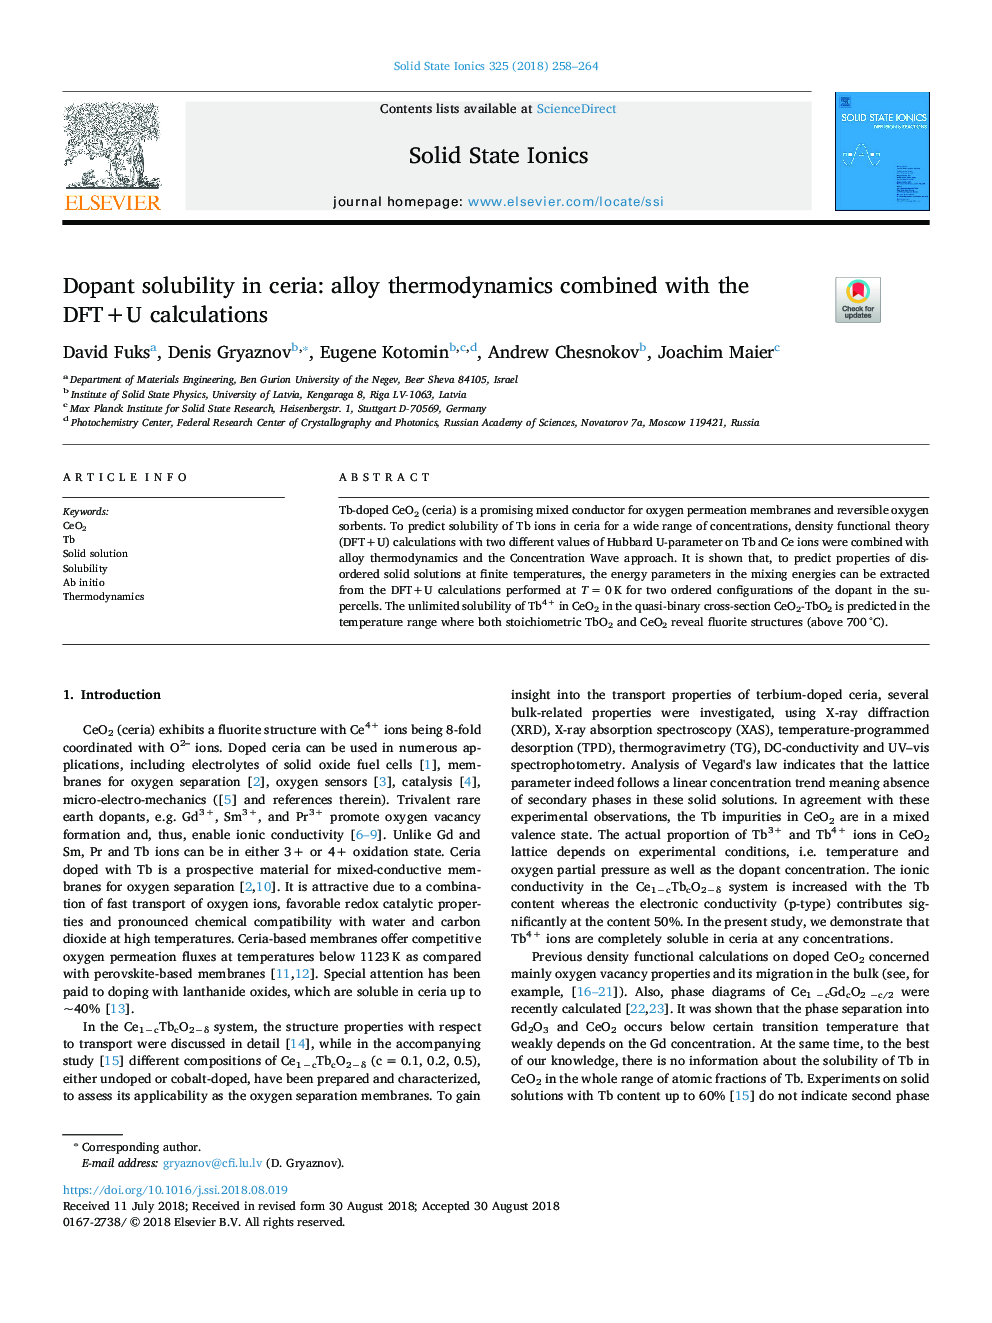 Dopant solubility in ceria: alloy thermodynamics combined with the DFT+U calculations